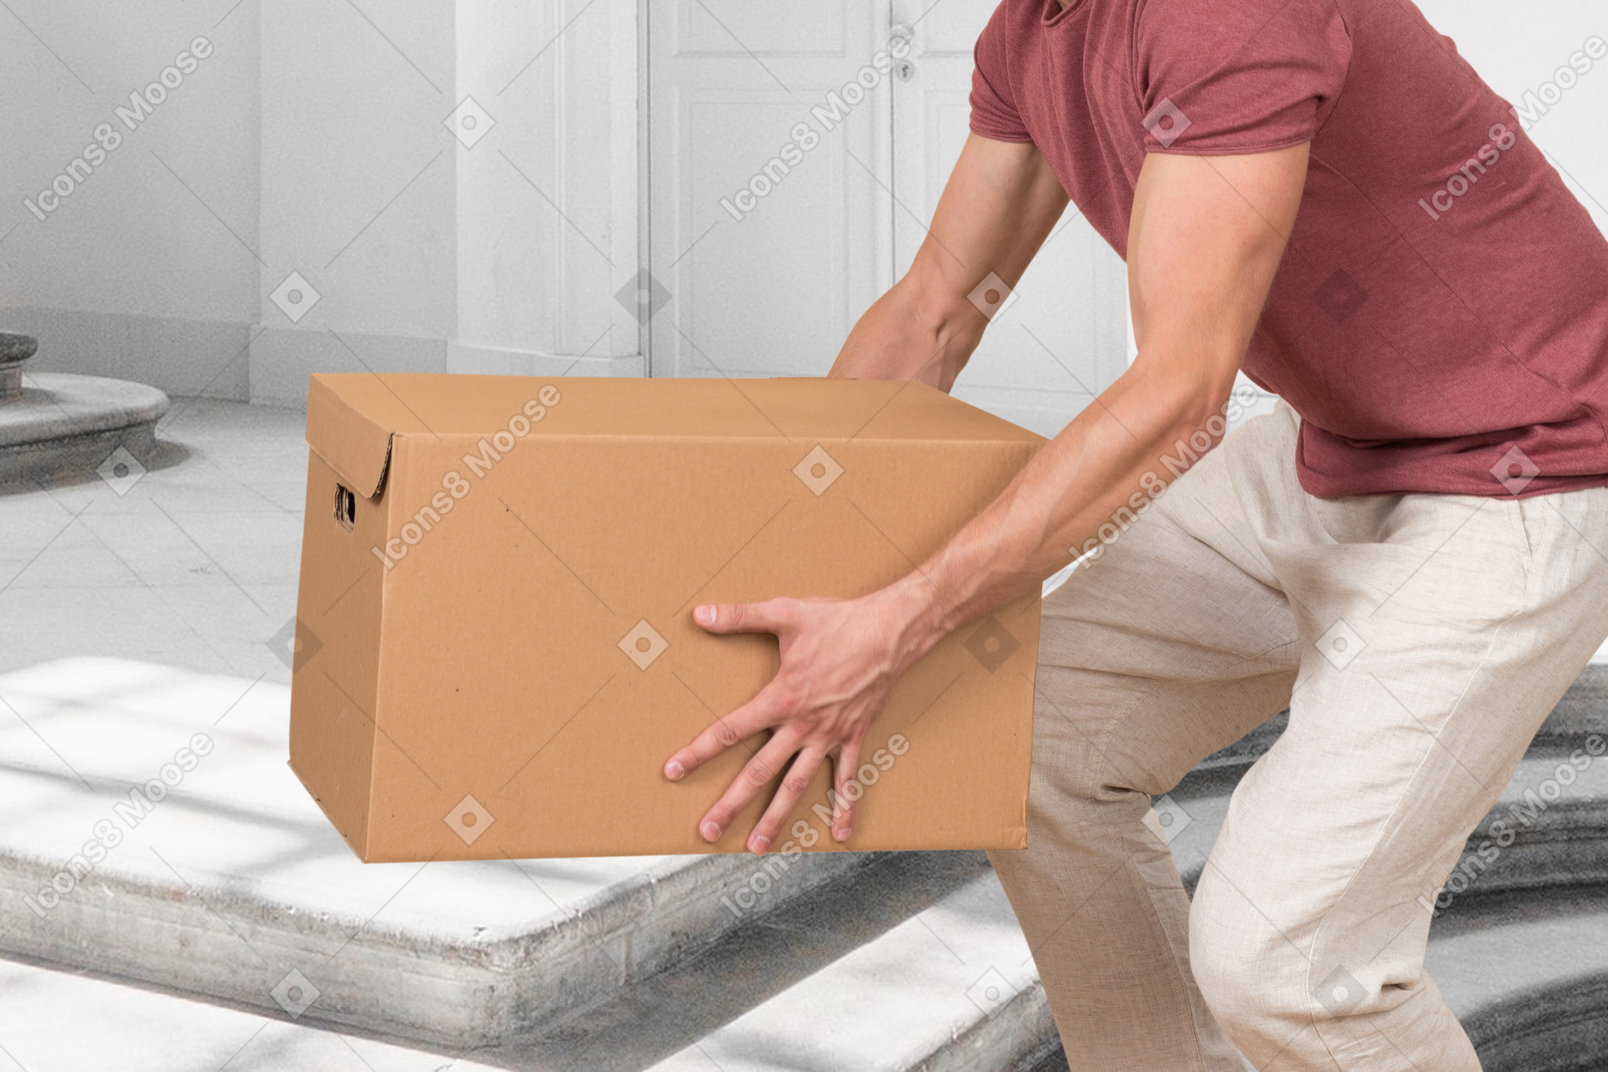 A man holding a box on the steps of a house